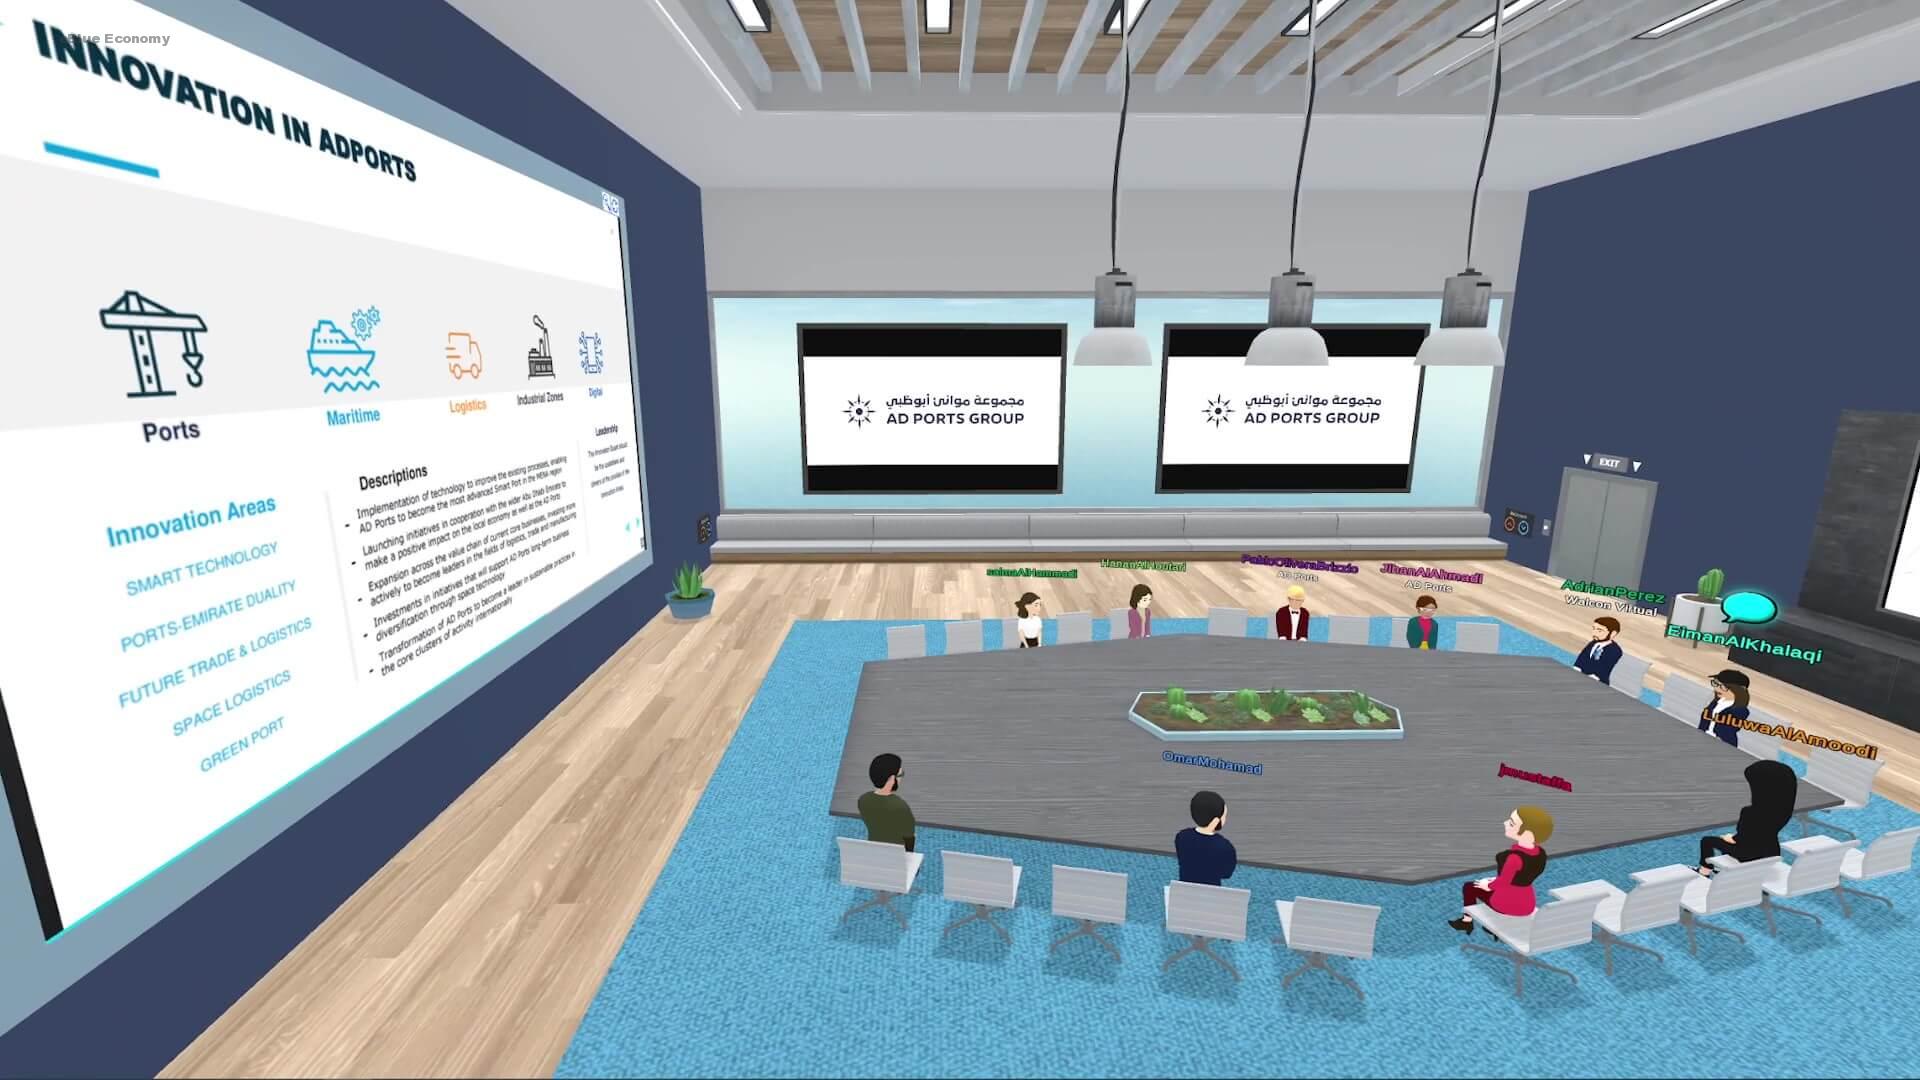 eBlue_economy_AD Ports Group Launches its UAE Innovation Month 2022 Activities in a 3D Virtual World “Metaverse”